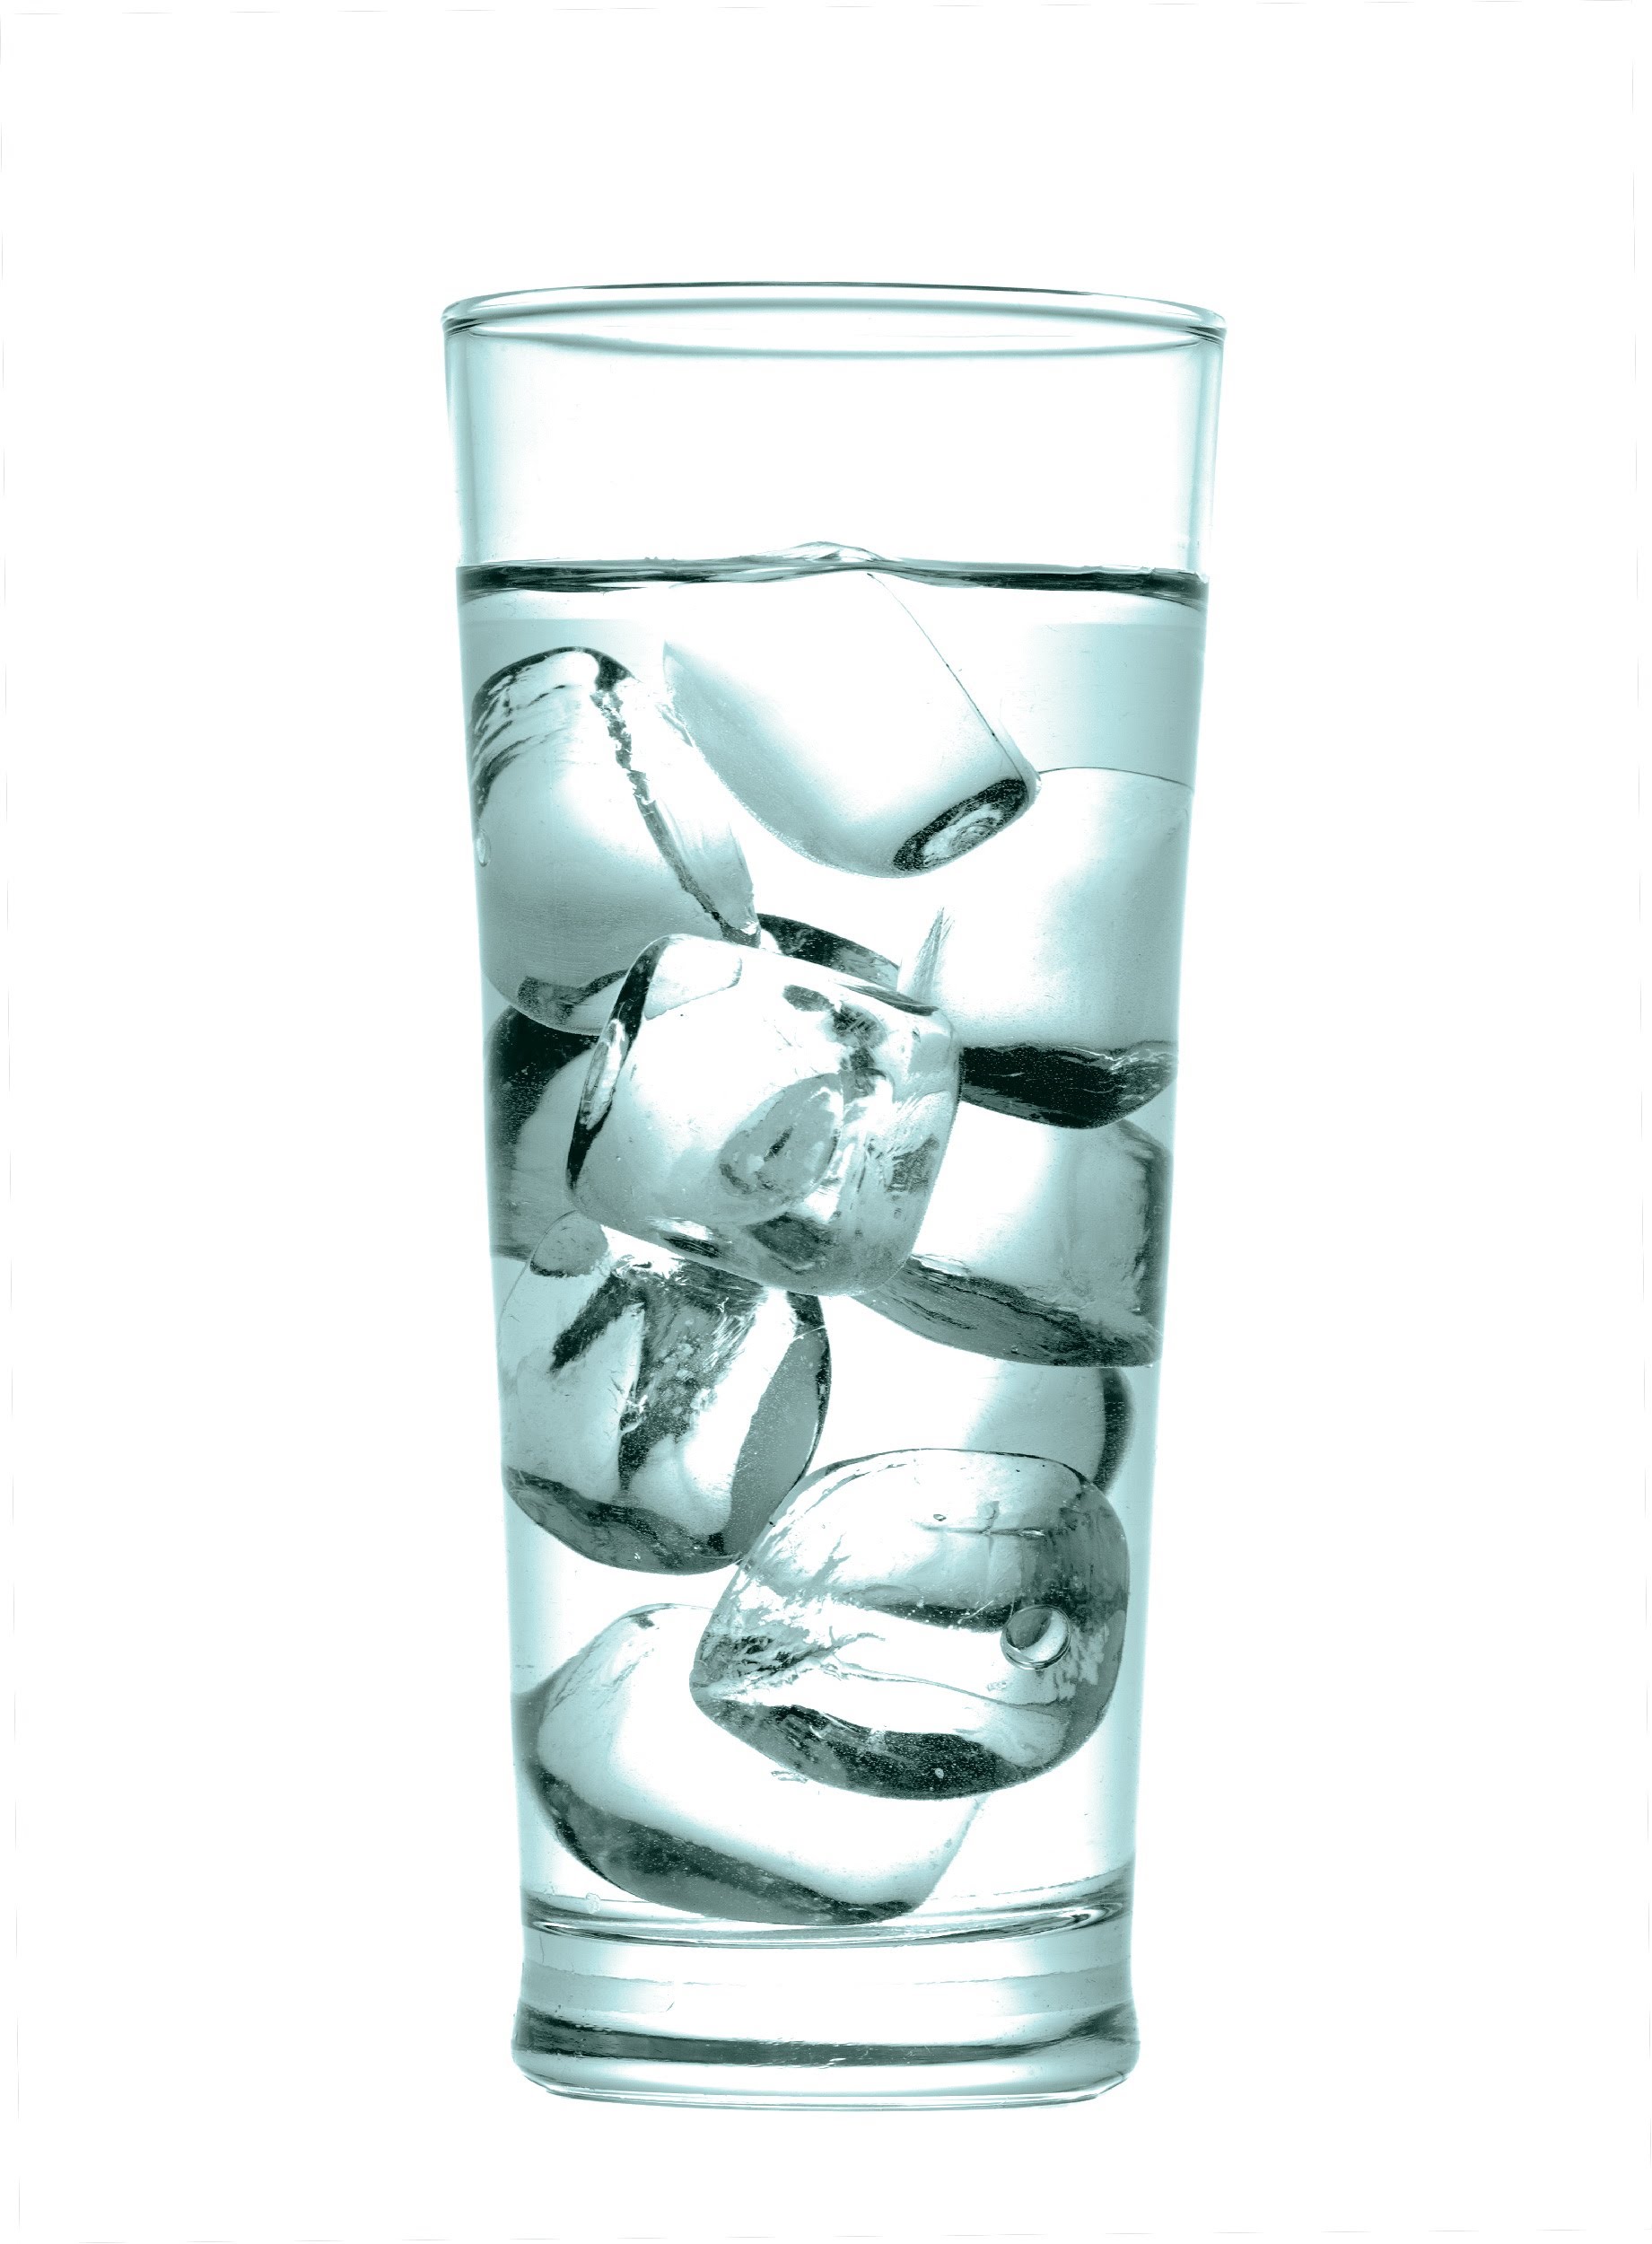 Stock Photo of Tall glass of 